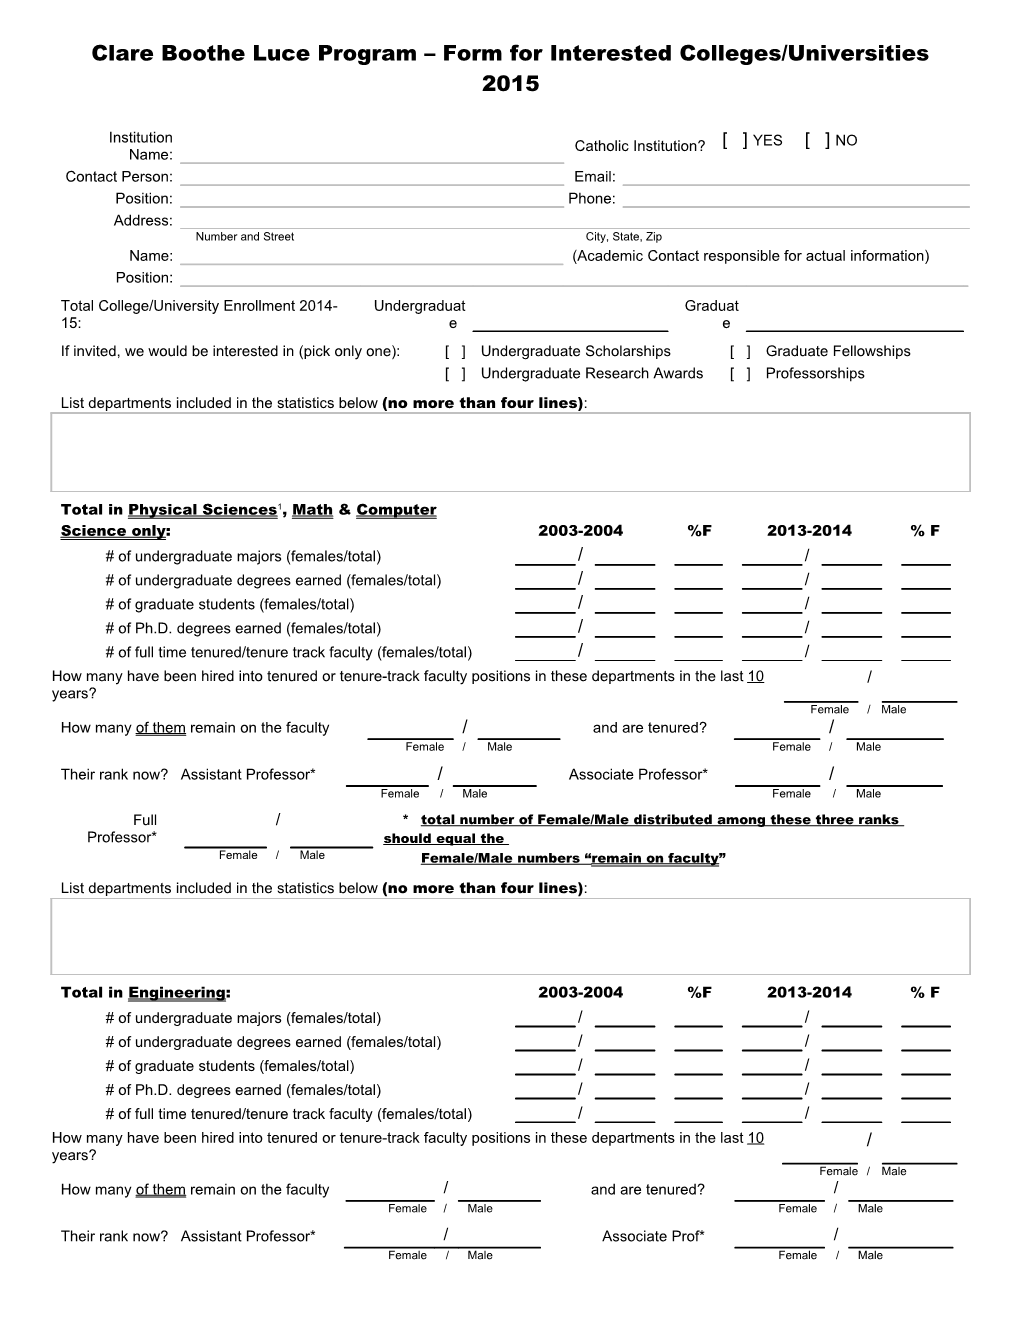 Clare Boothe Luce Program Form for Interested Colleges/Universities 2015